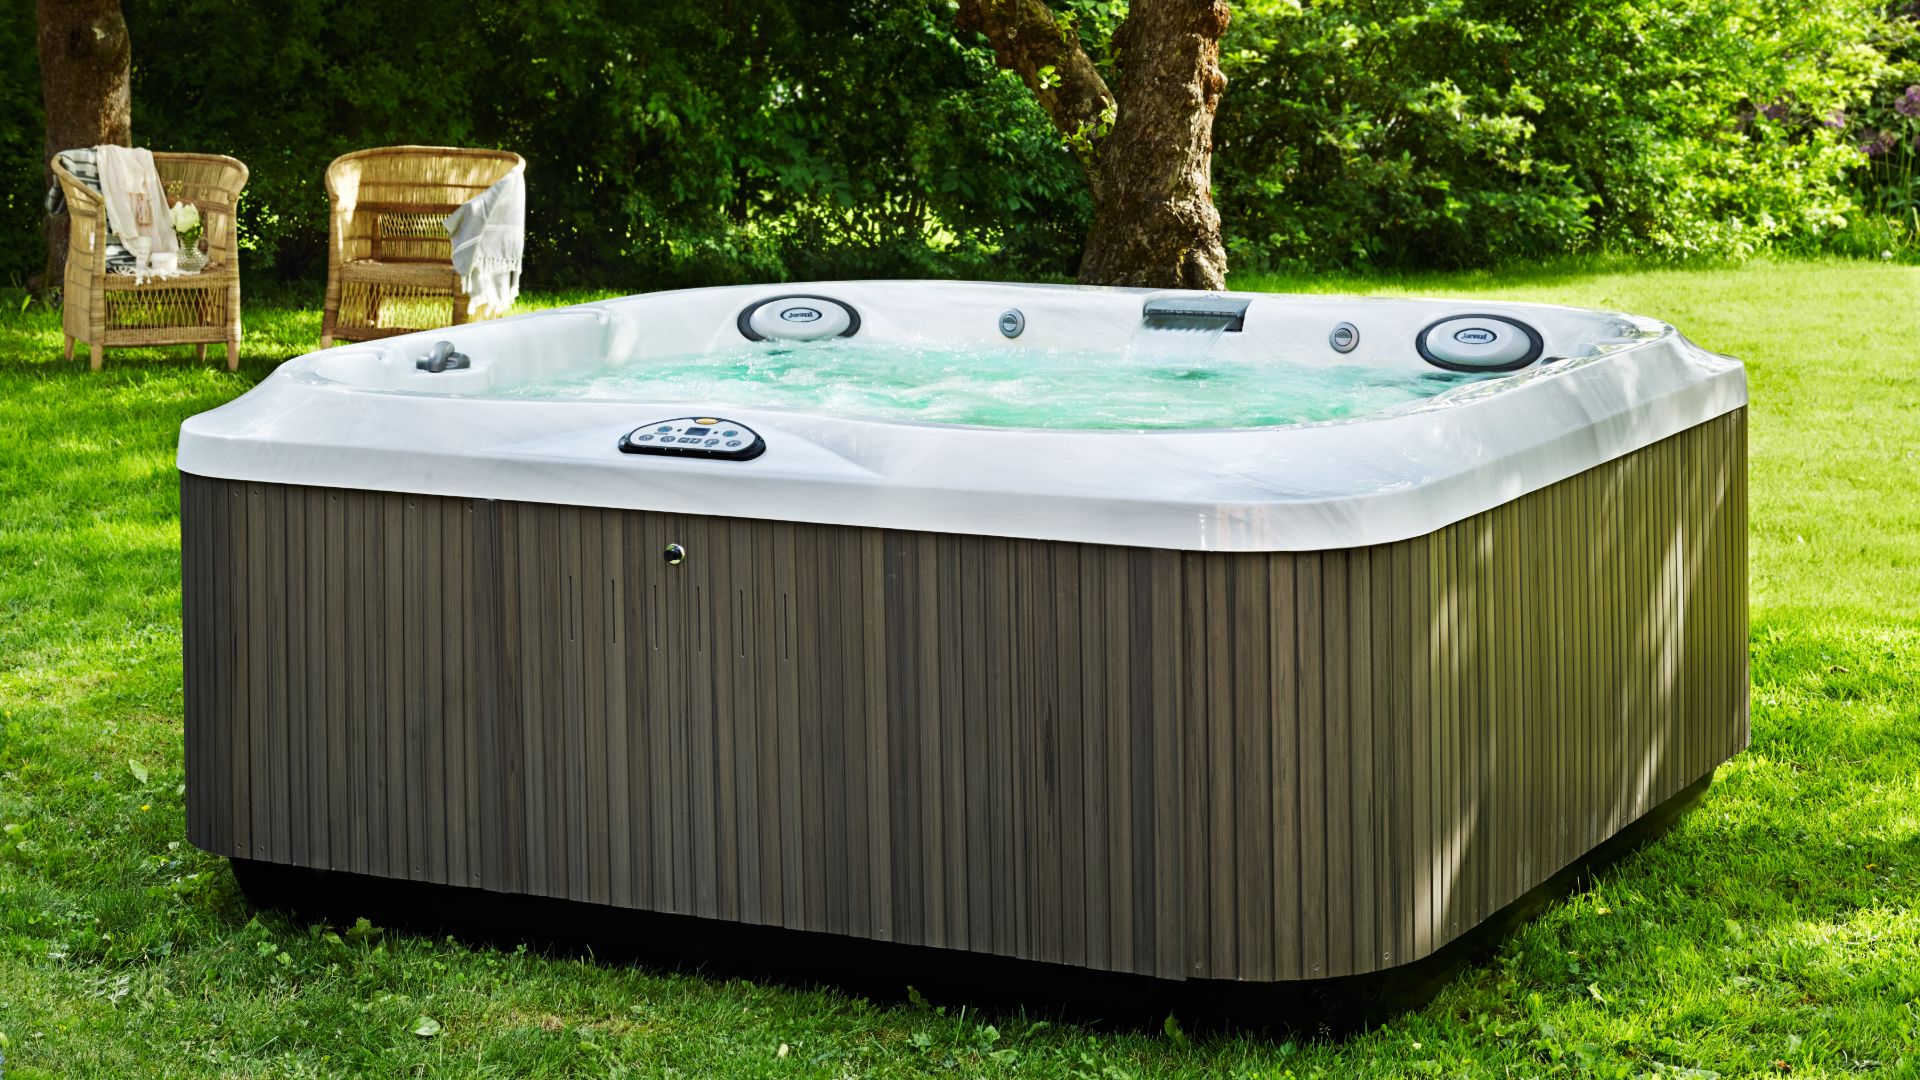 4 Reasons To Take A Daily Soak In Your Hot Tub Texas Hot Tub Company 